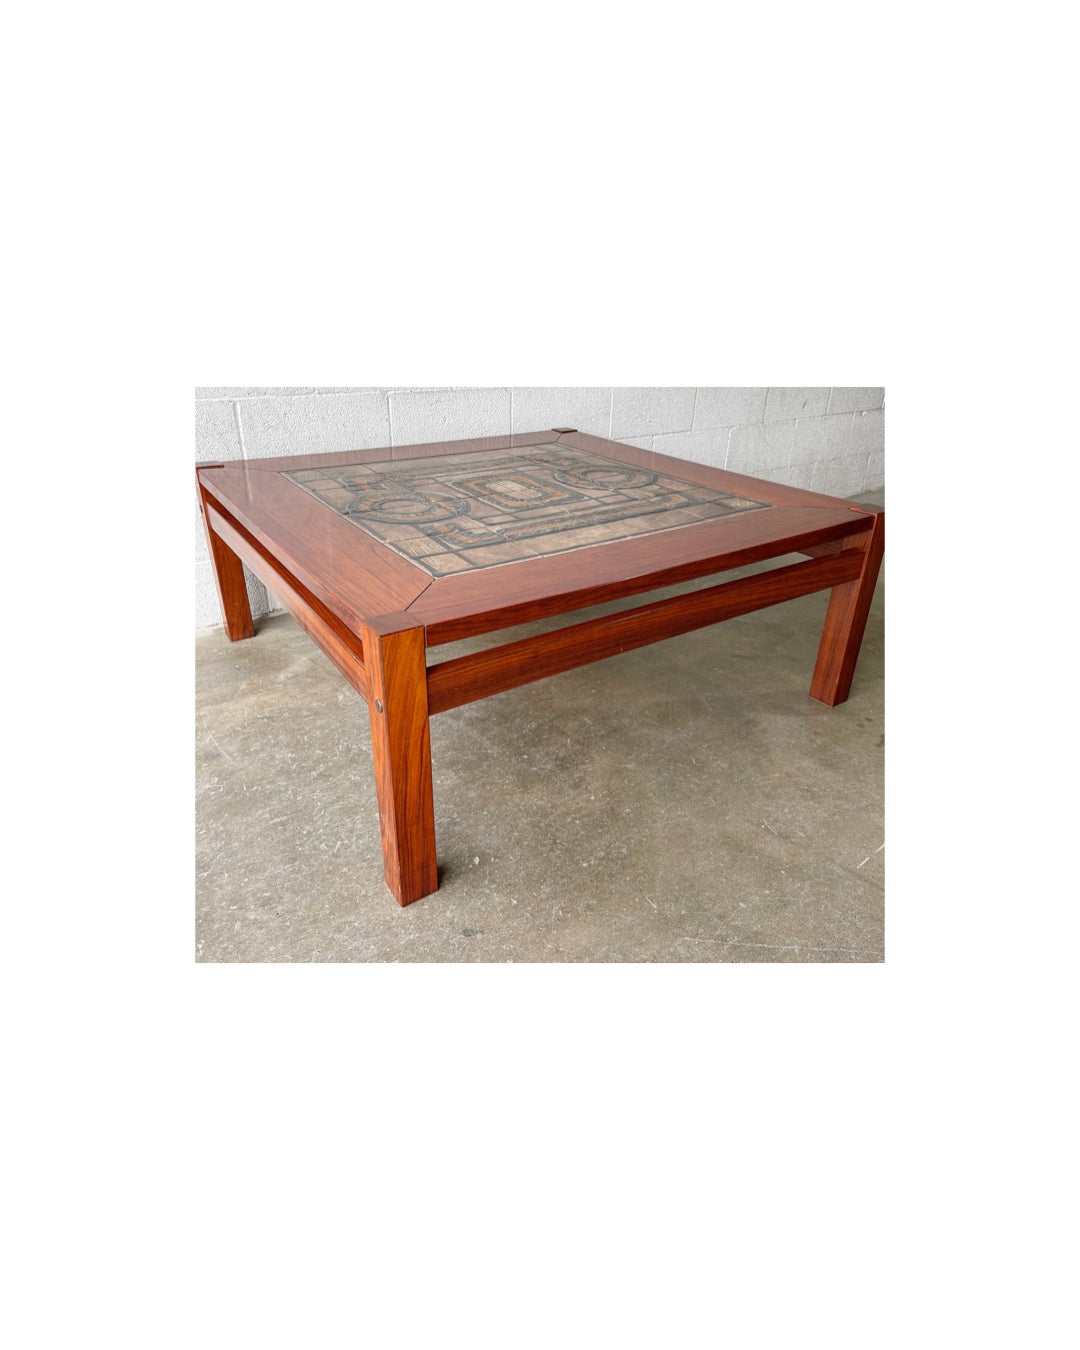 Vintage Danish Rosewood - Ox Art Square Coffee Table